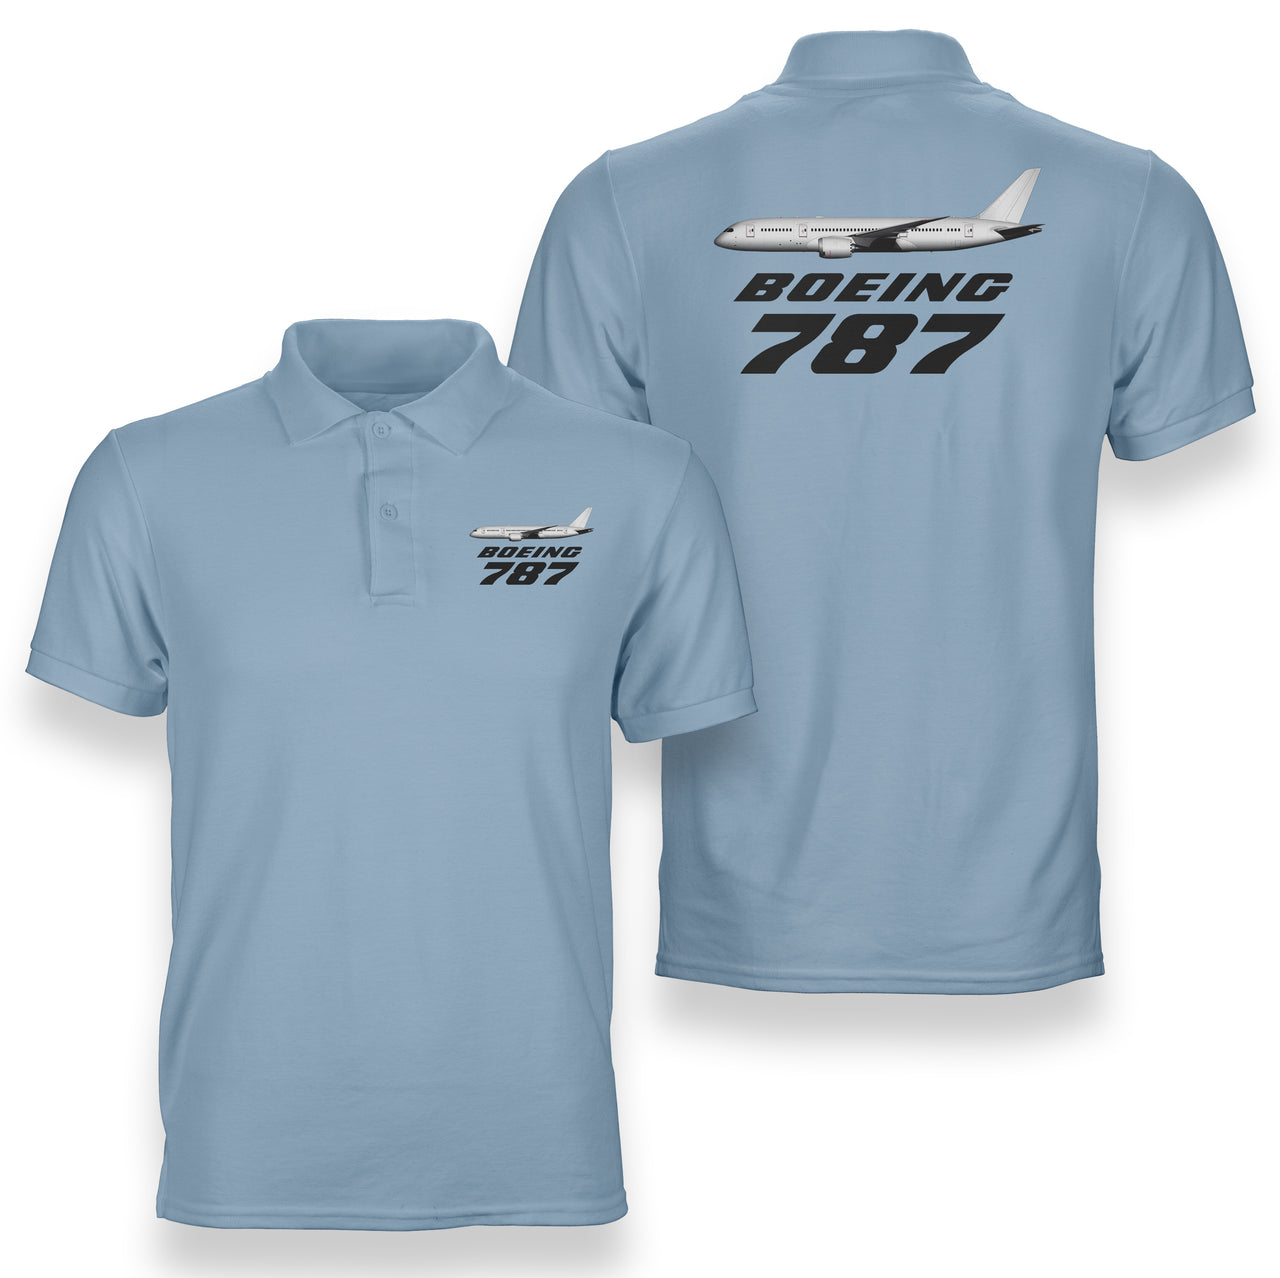 The Boeing 787 Designed Double Side Polo T-Shirts